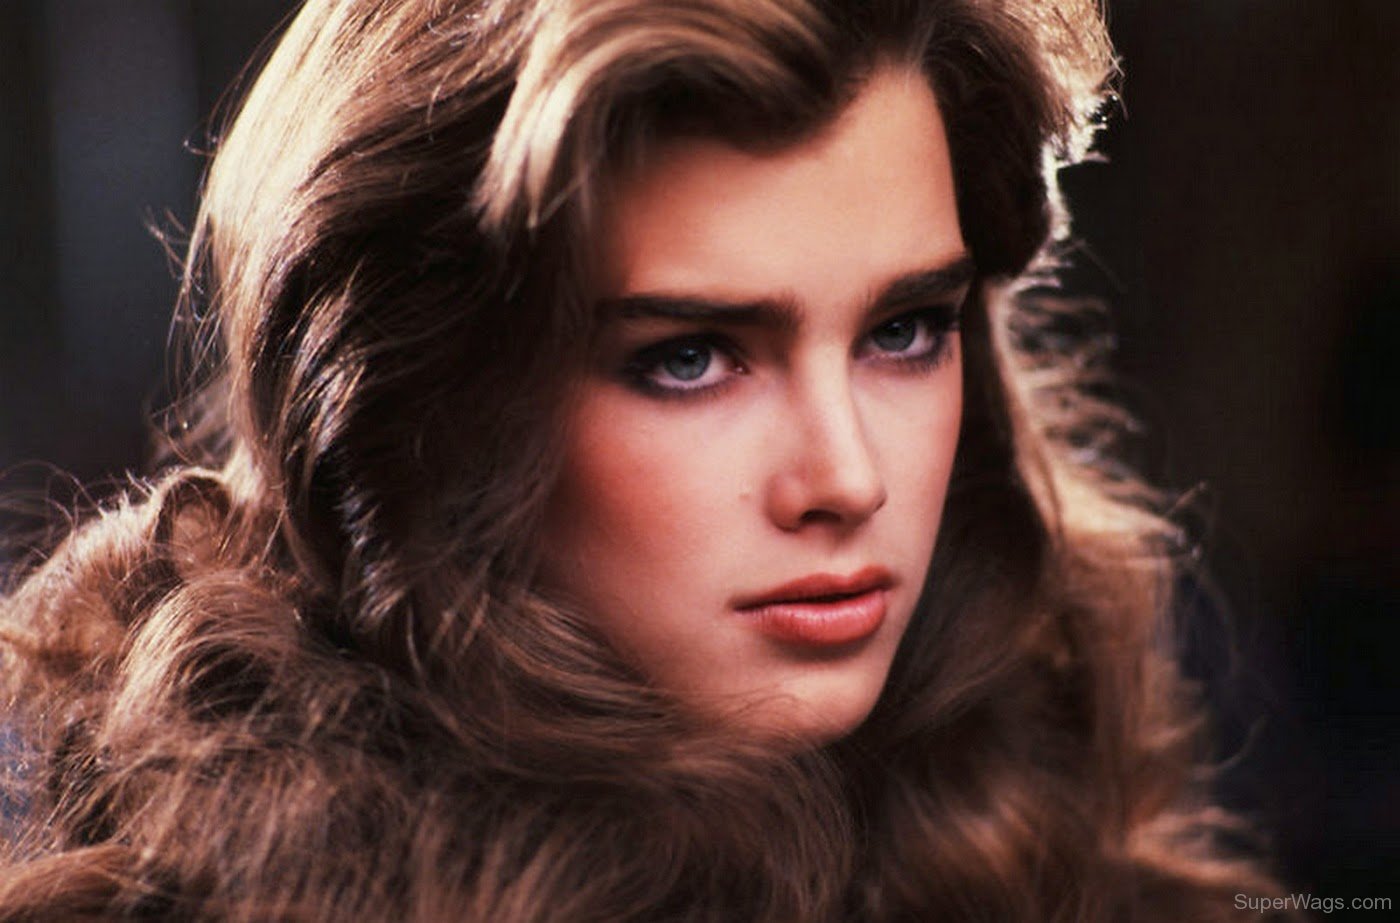 Picture Of Brooke Shields | Super WAGS - Hottest Wives and Girlfriends ...